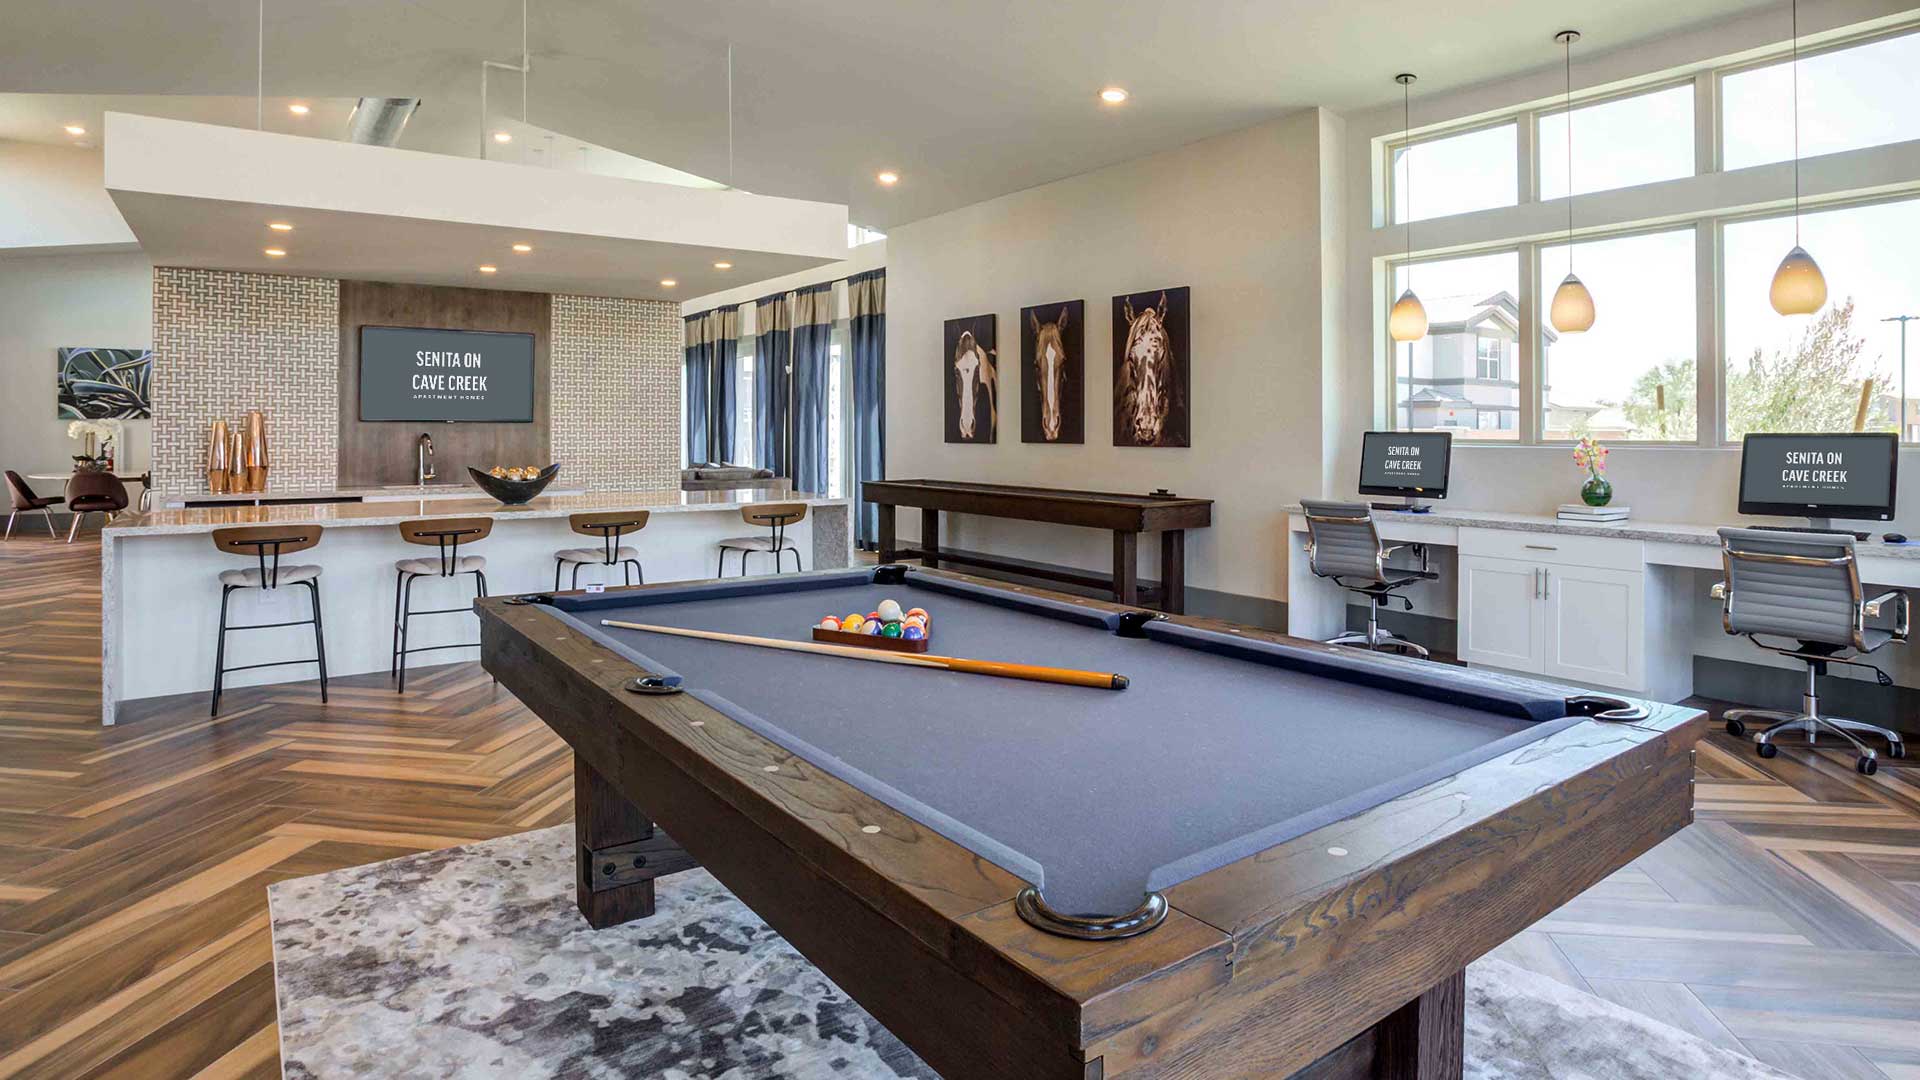 Modern home interior with a pool table, kitchen bar stools, and a home office setup, featuring large windows and hardwood flooring.